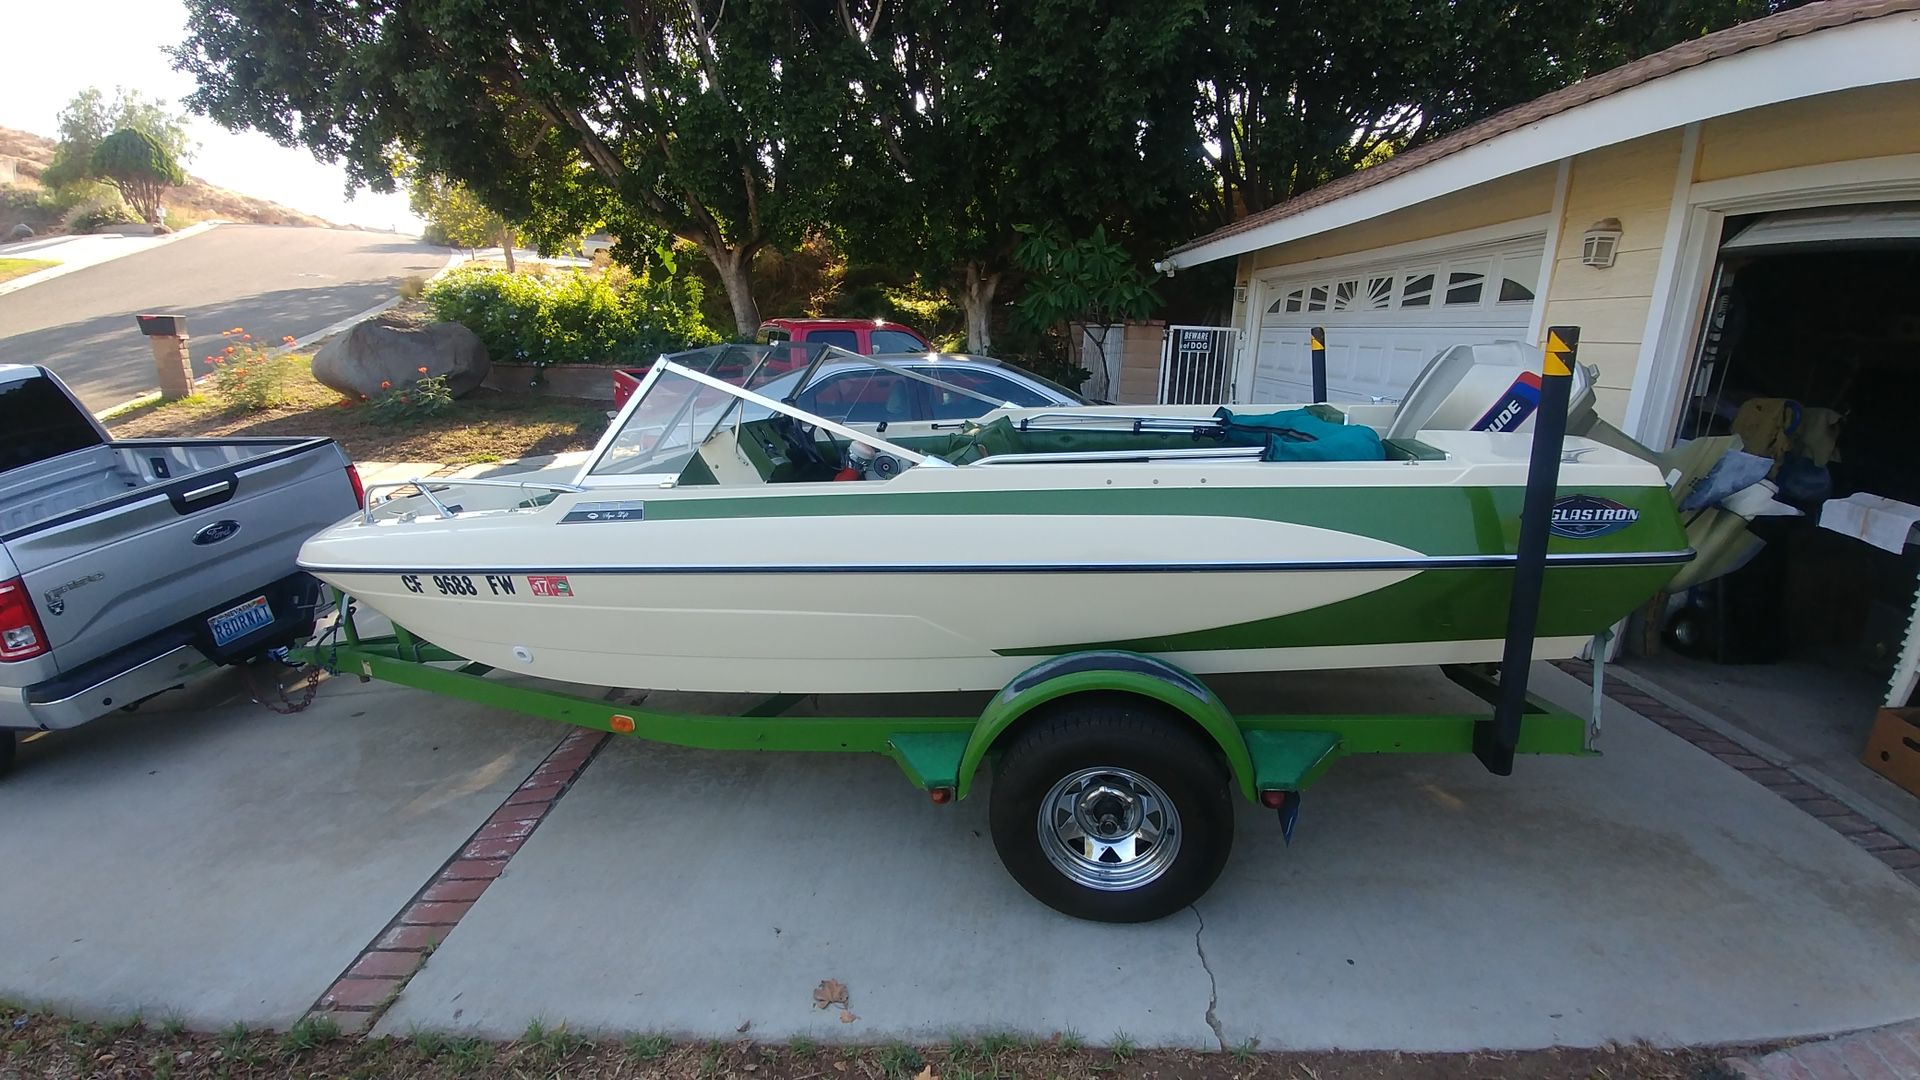 1976 Glastron V-178 With Outboard Evinrude Motor